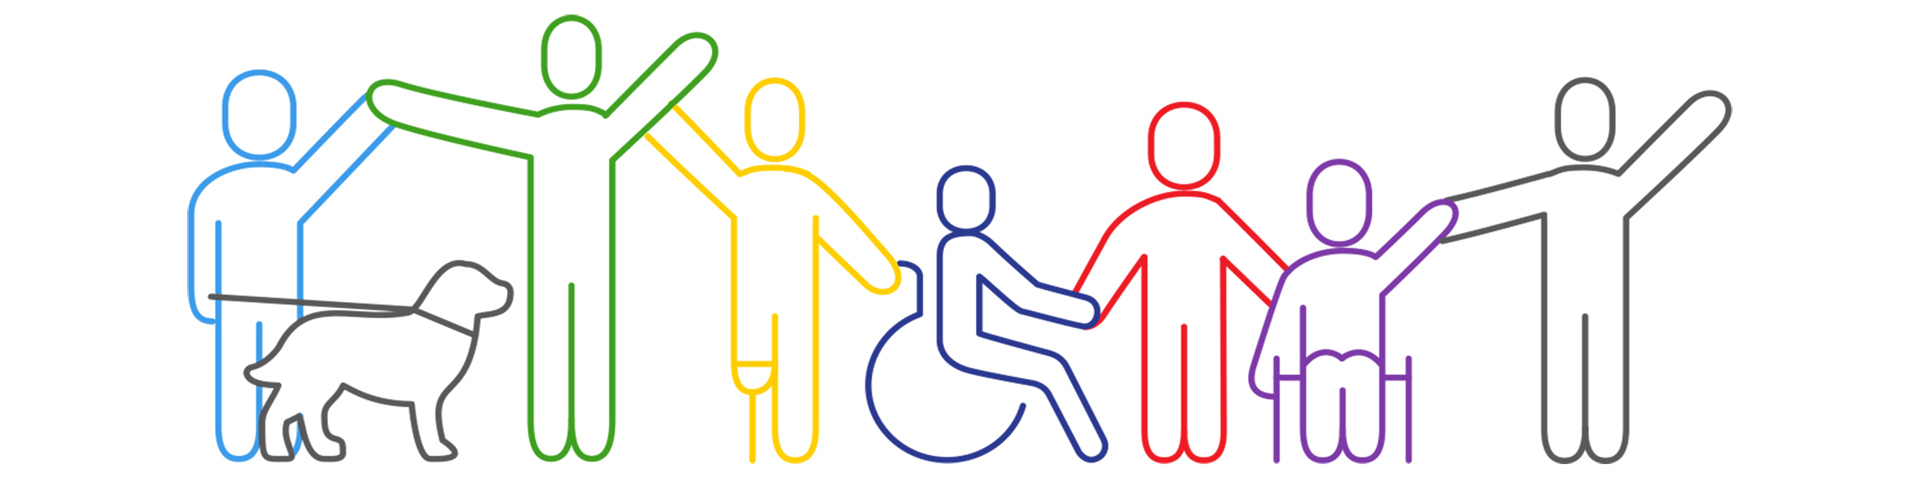 icons representing people with various disabilities and accommodations